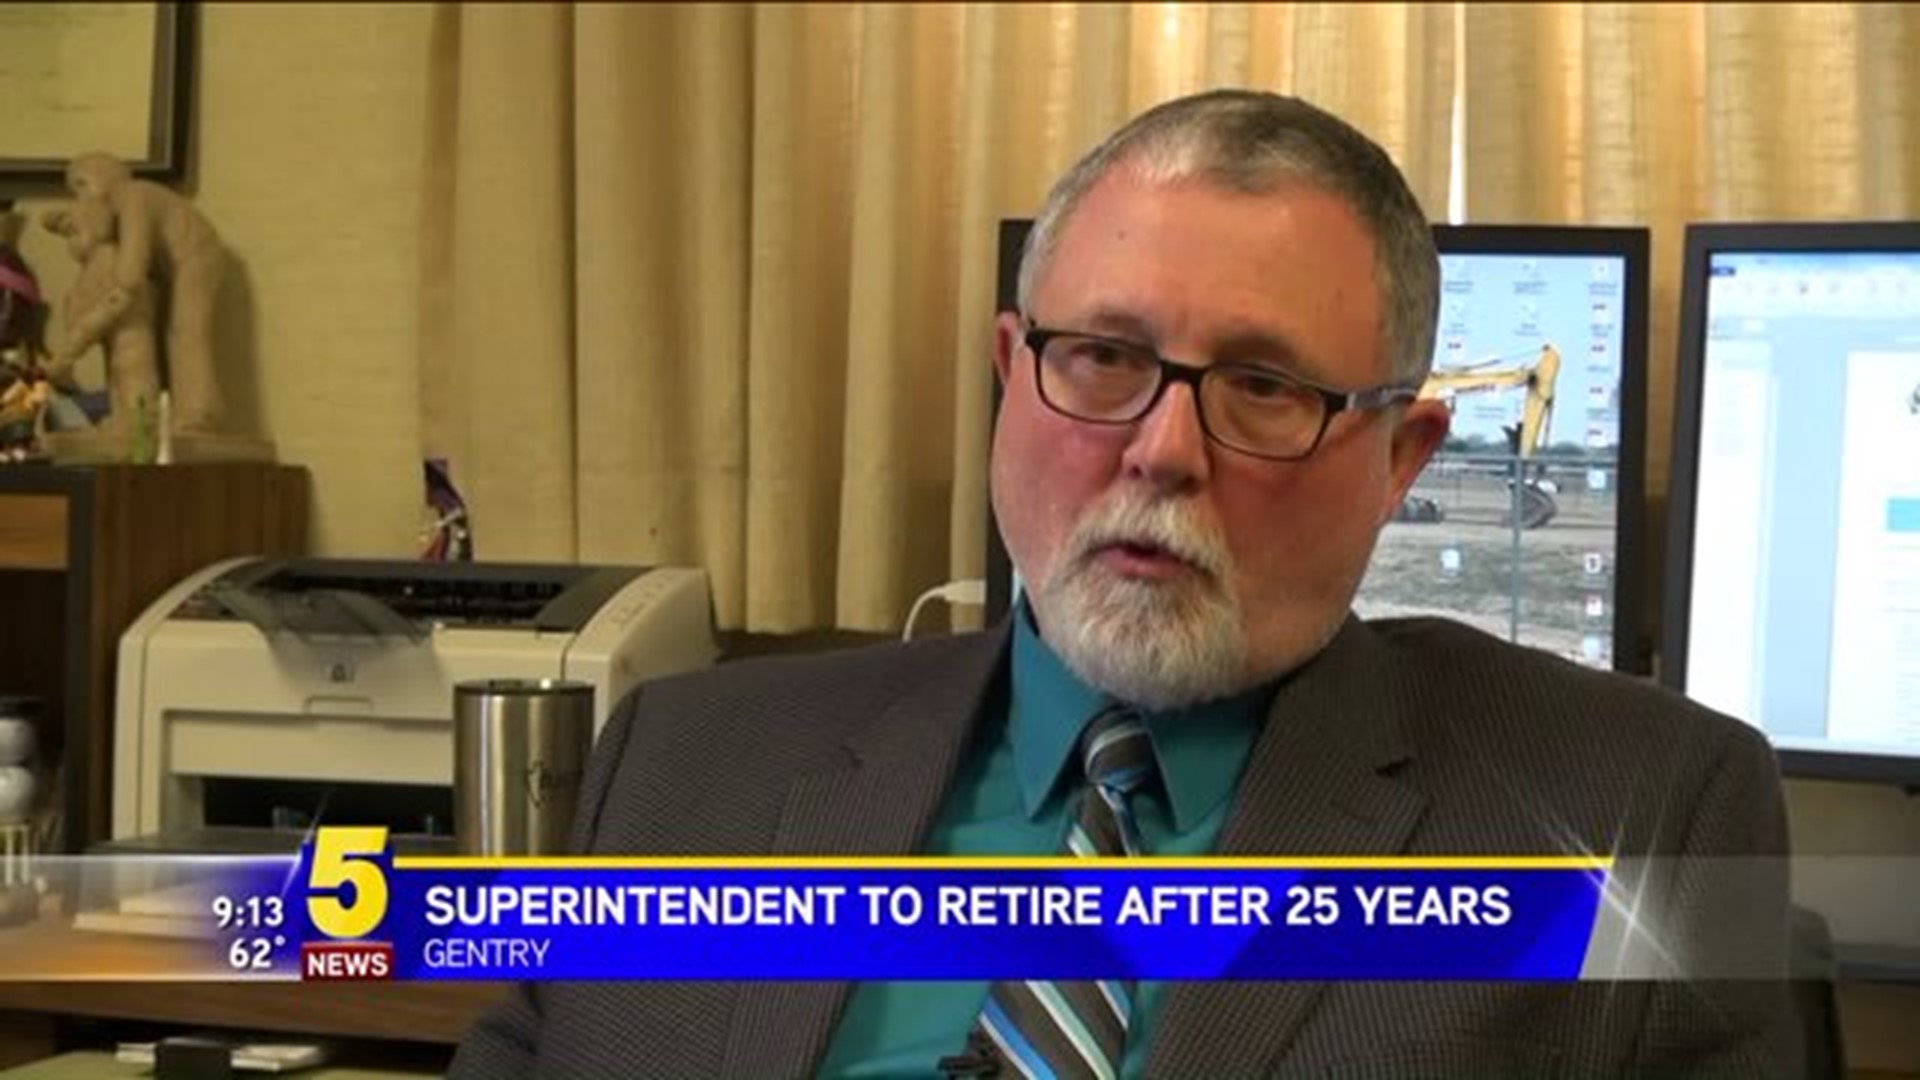 Superintendent To Retire After 25 Years